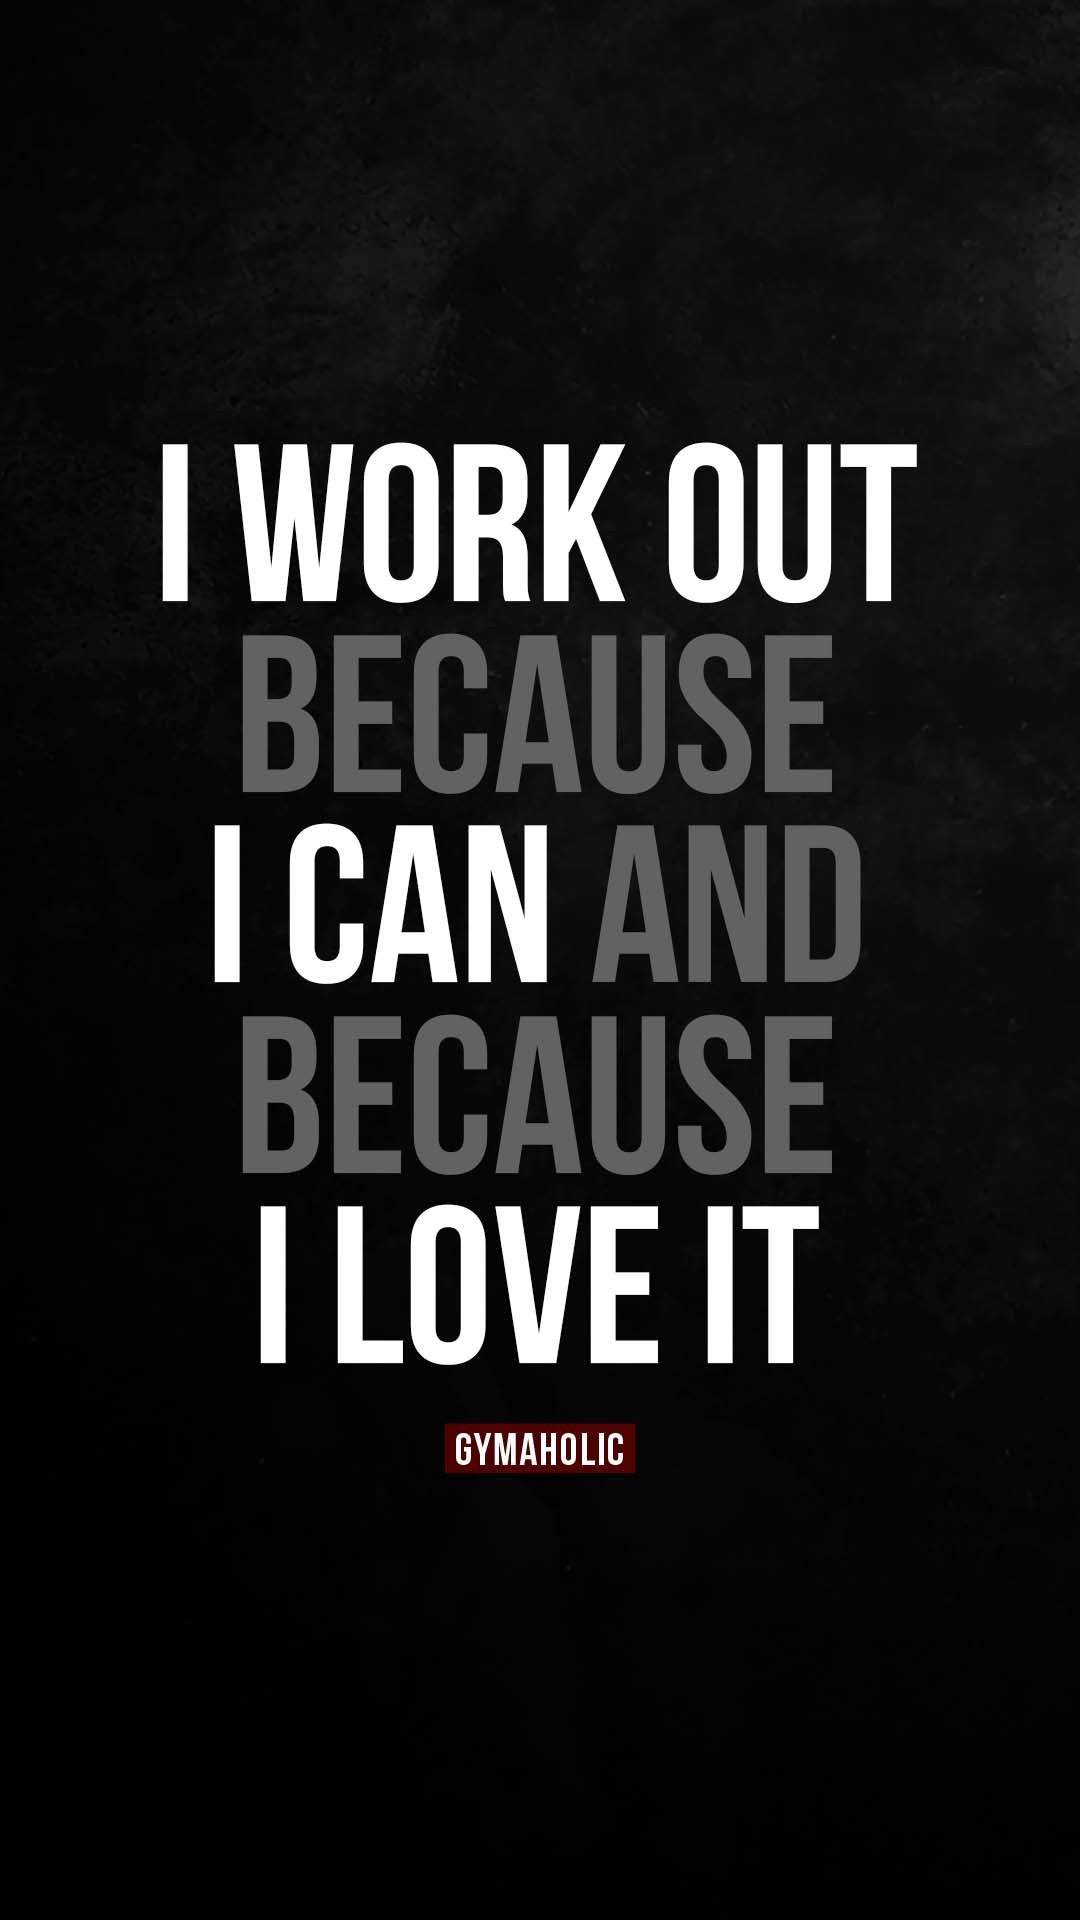 I work out because I can and because I love it